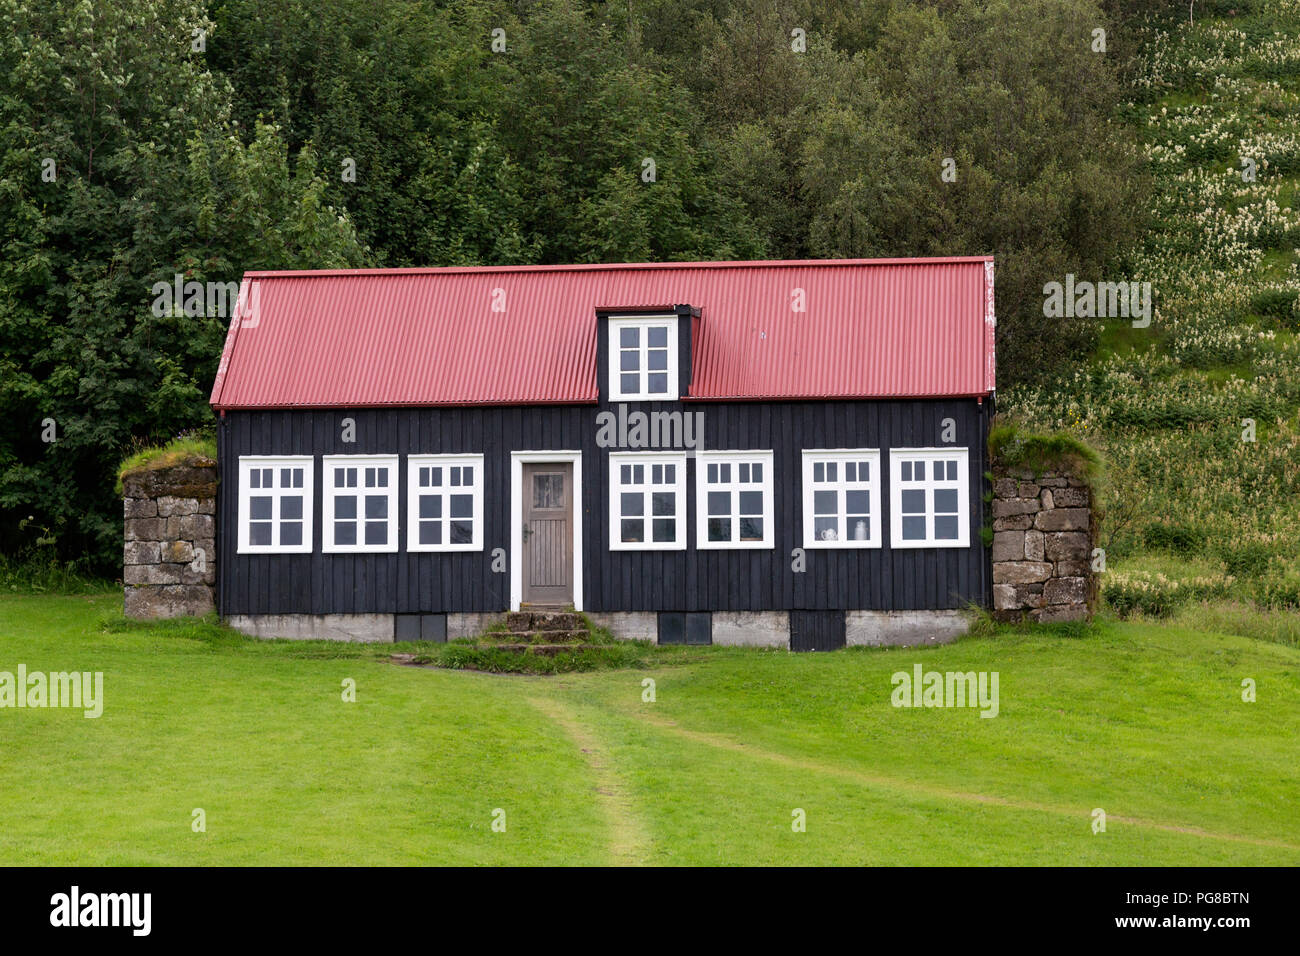 Buildings at Skogar Museum in Iceland. It has a cultural heritage collection of 15,000 regional artifacts in 6 historical buildings and 3 museums. Stock Photo